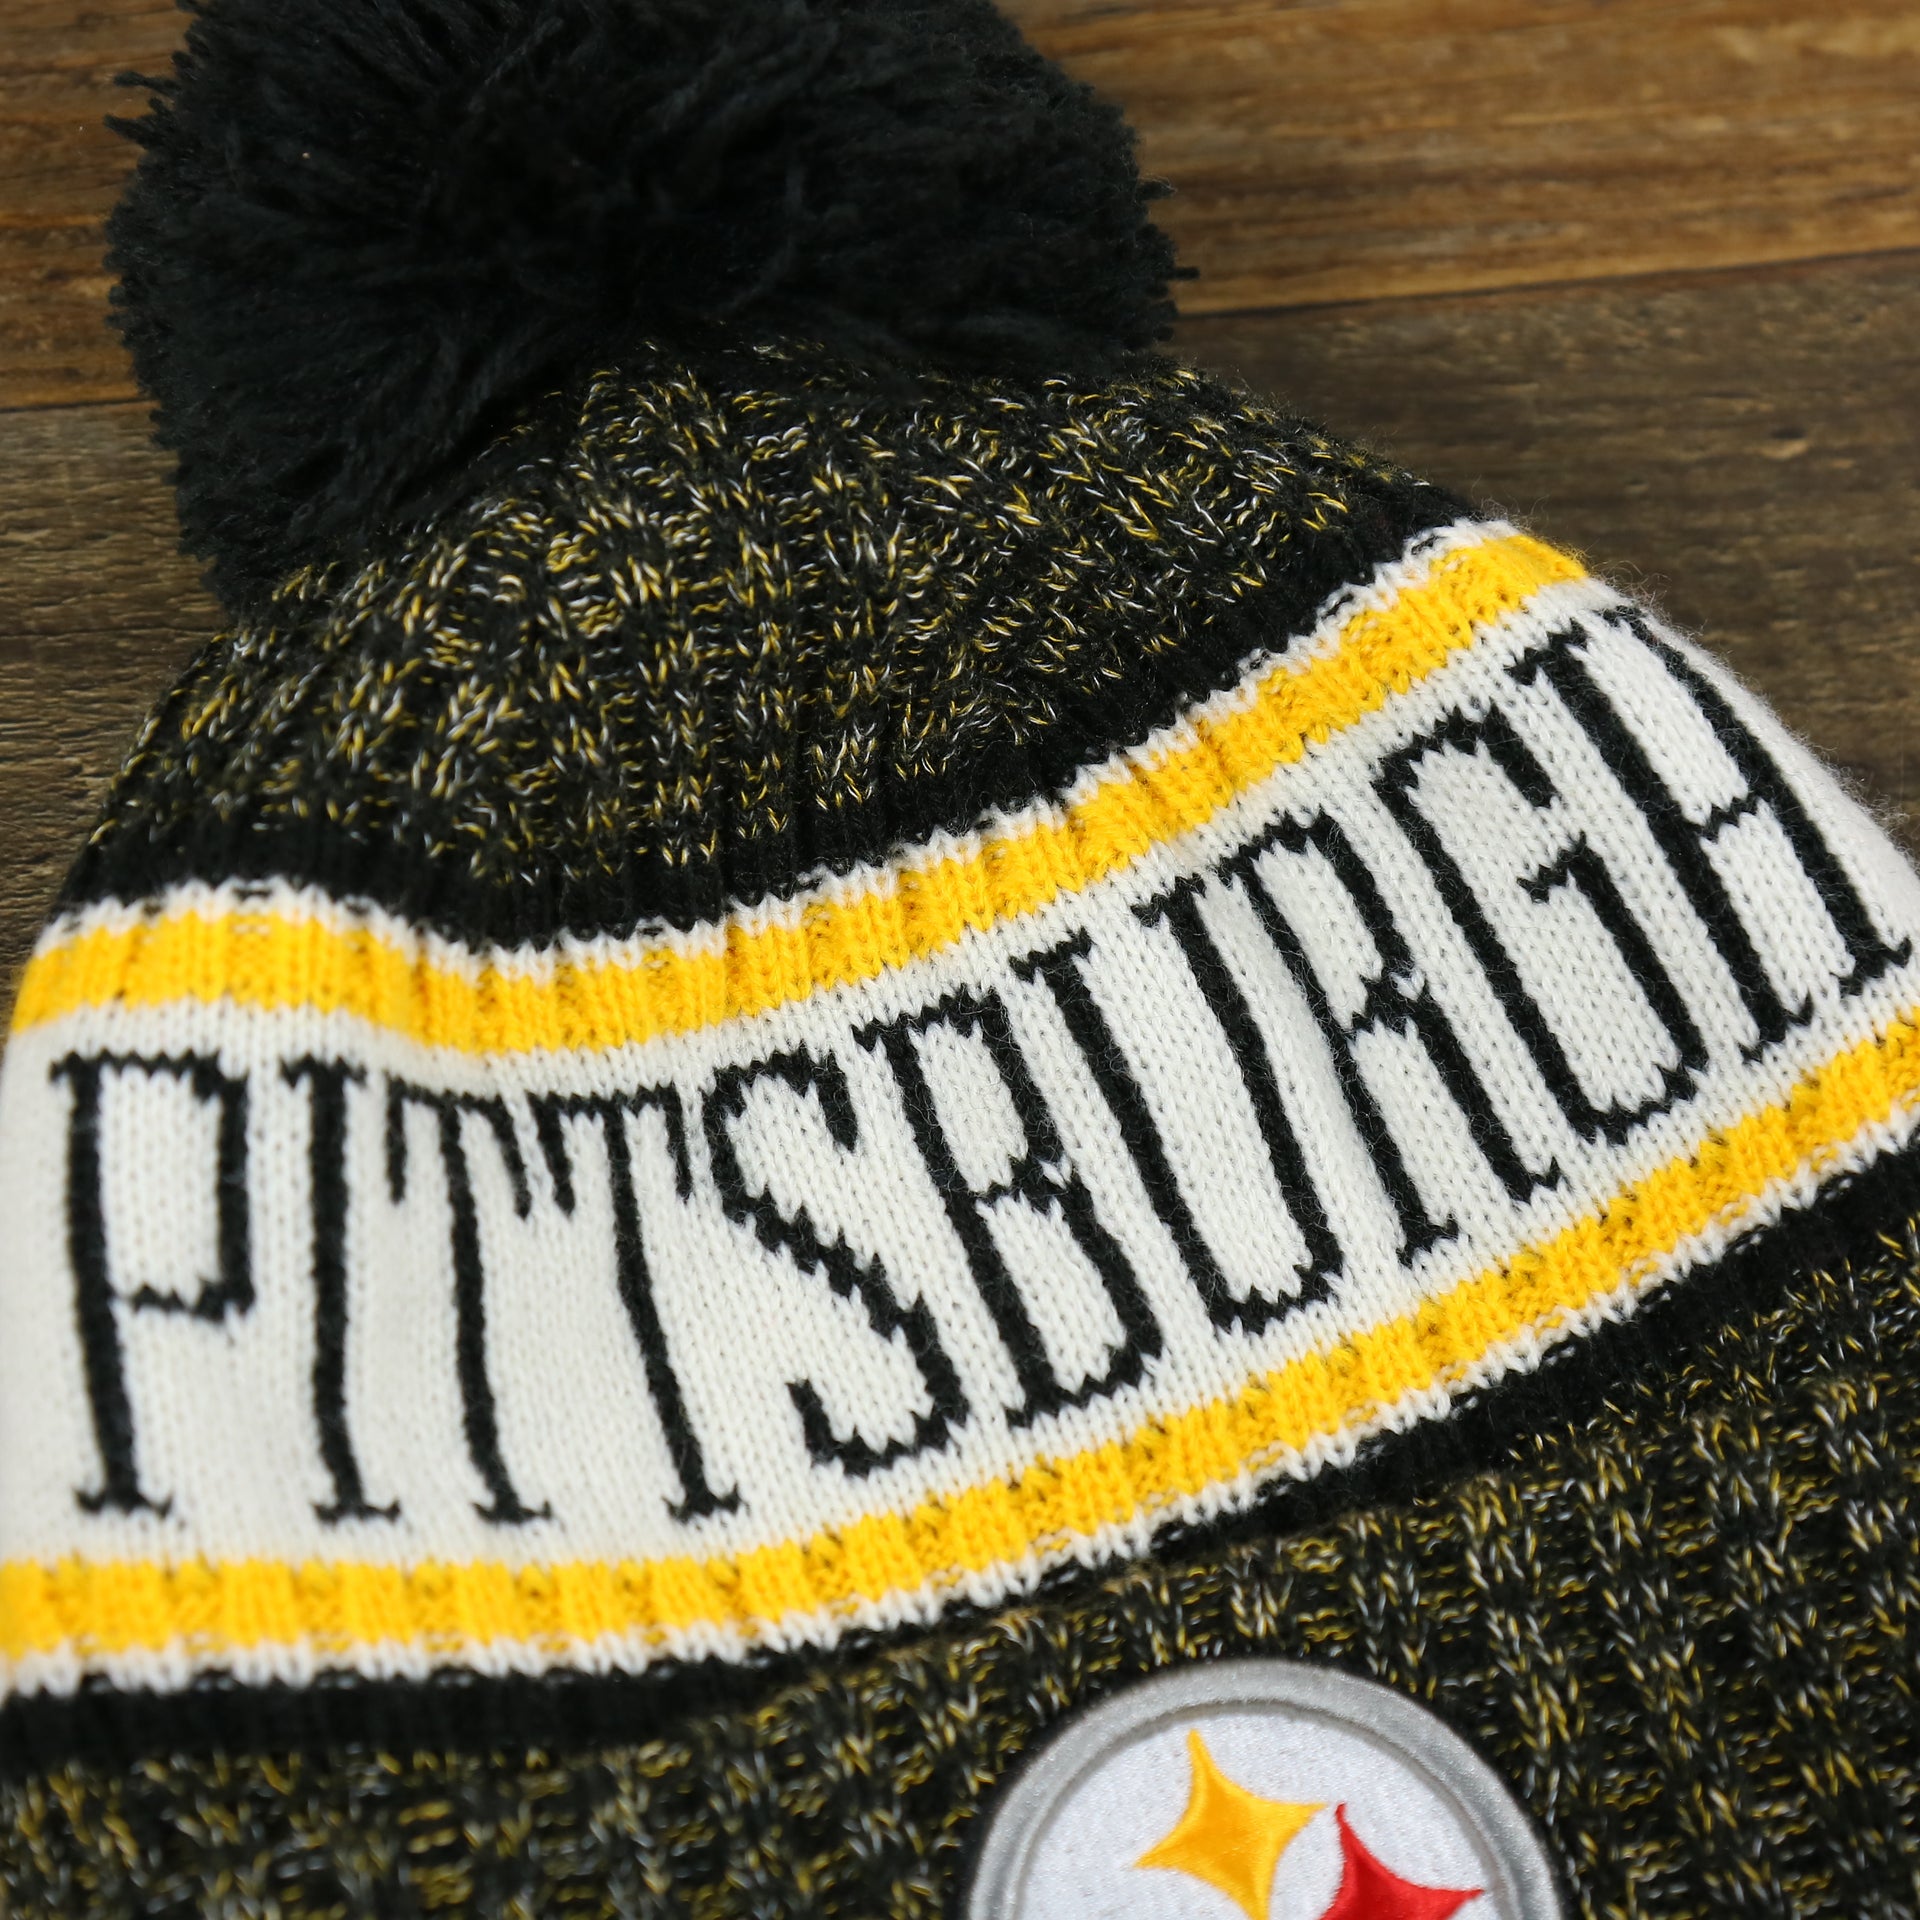 The Pittsburgh Steelers Logo on the Pittsburgh Steelers On Field Cold Weather Striped Wordmark Pom Pom Winter Beanie | Black and Yellow Beanie